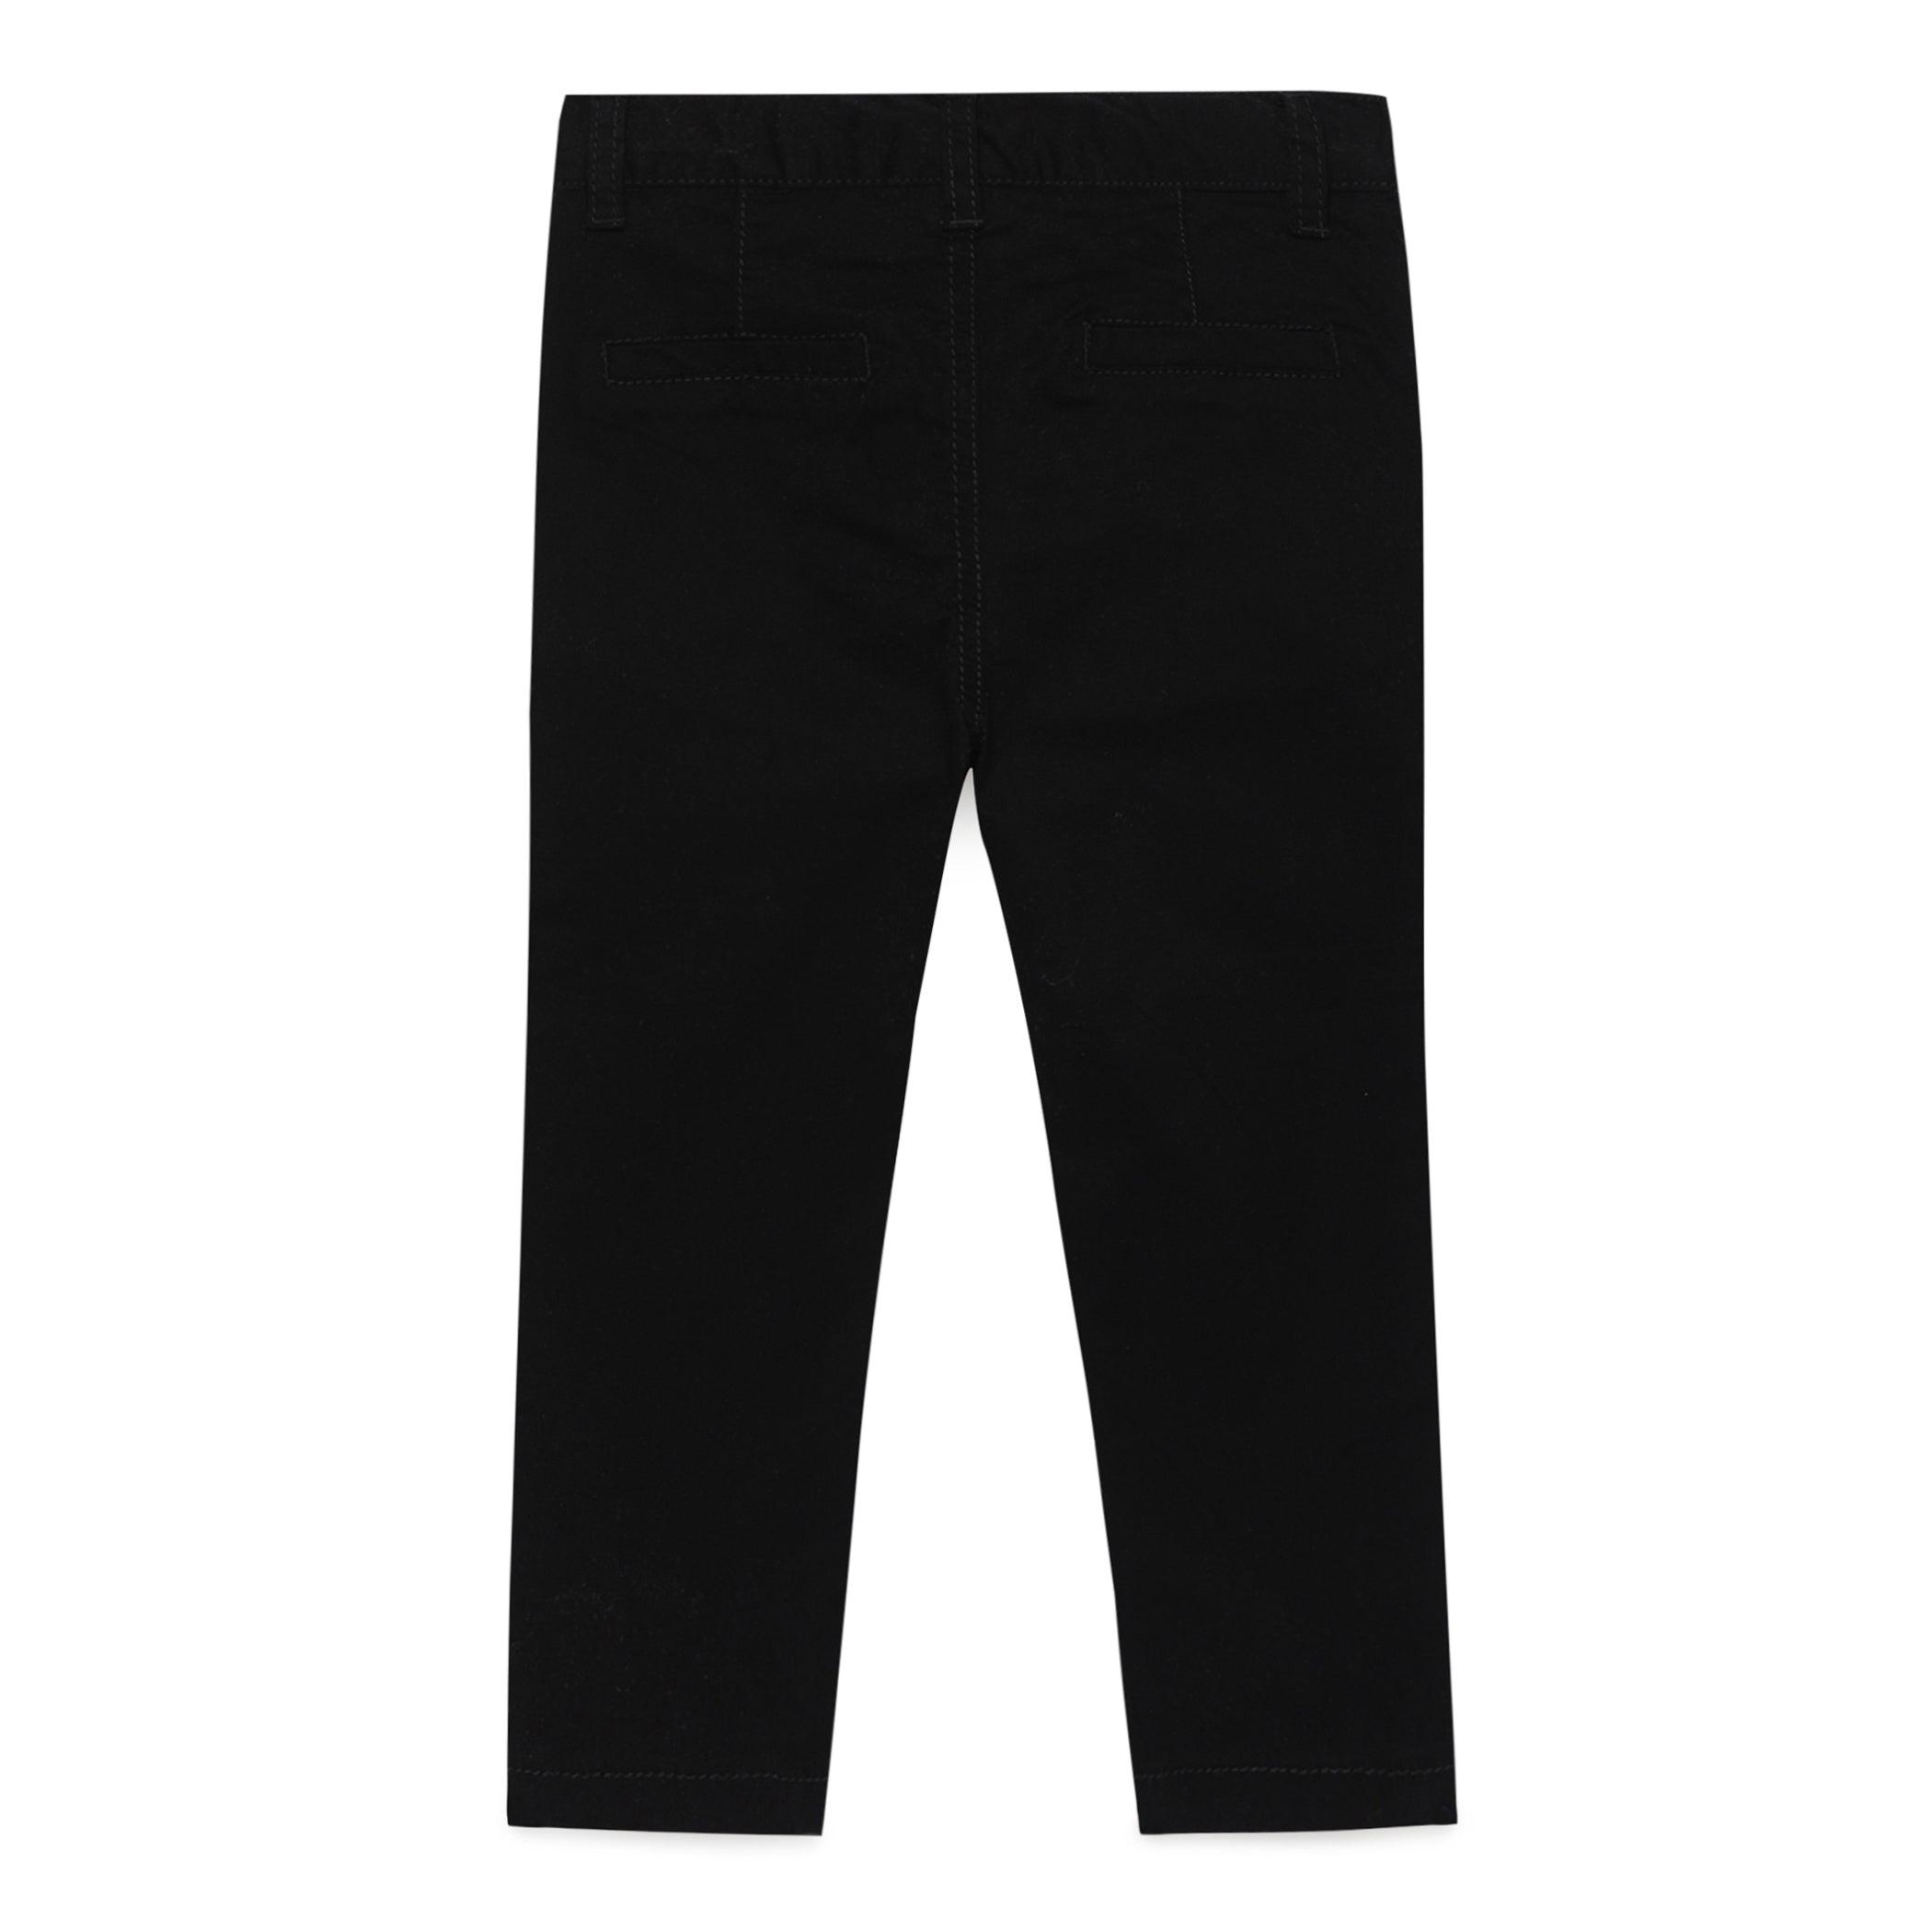 Buy 612 League 98% Cotton 2% Spandex Solid Black Boy Pants 5-6 Years at  Amazon.in